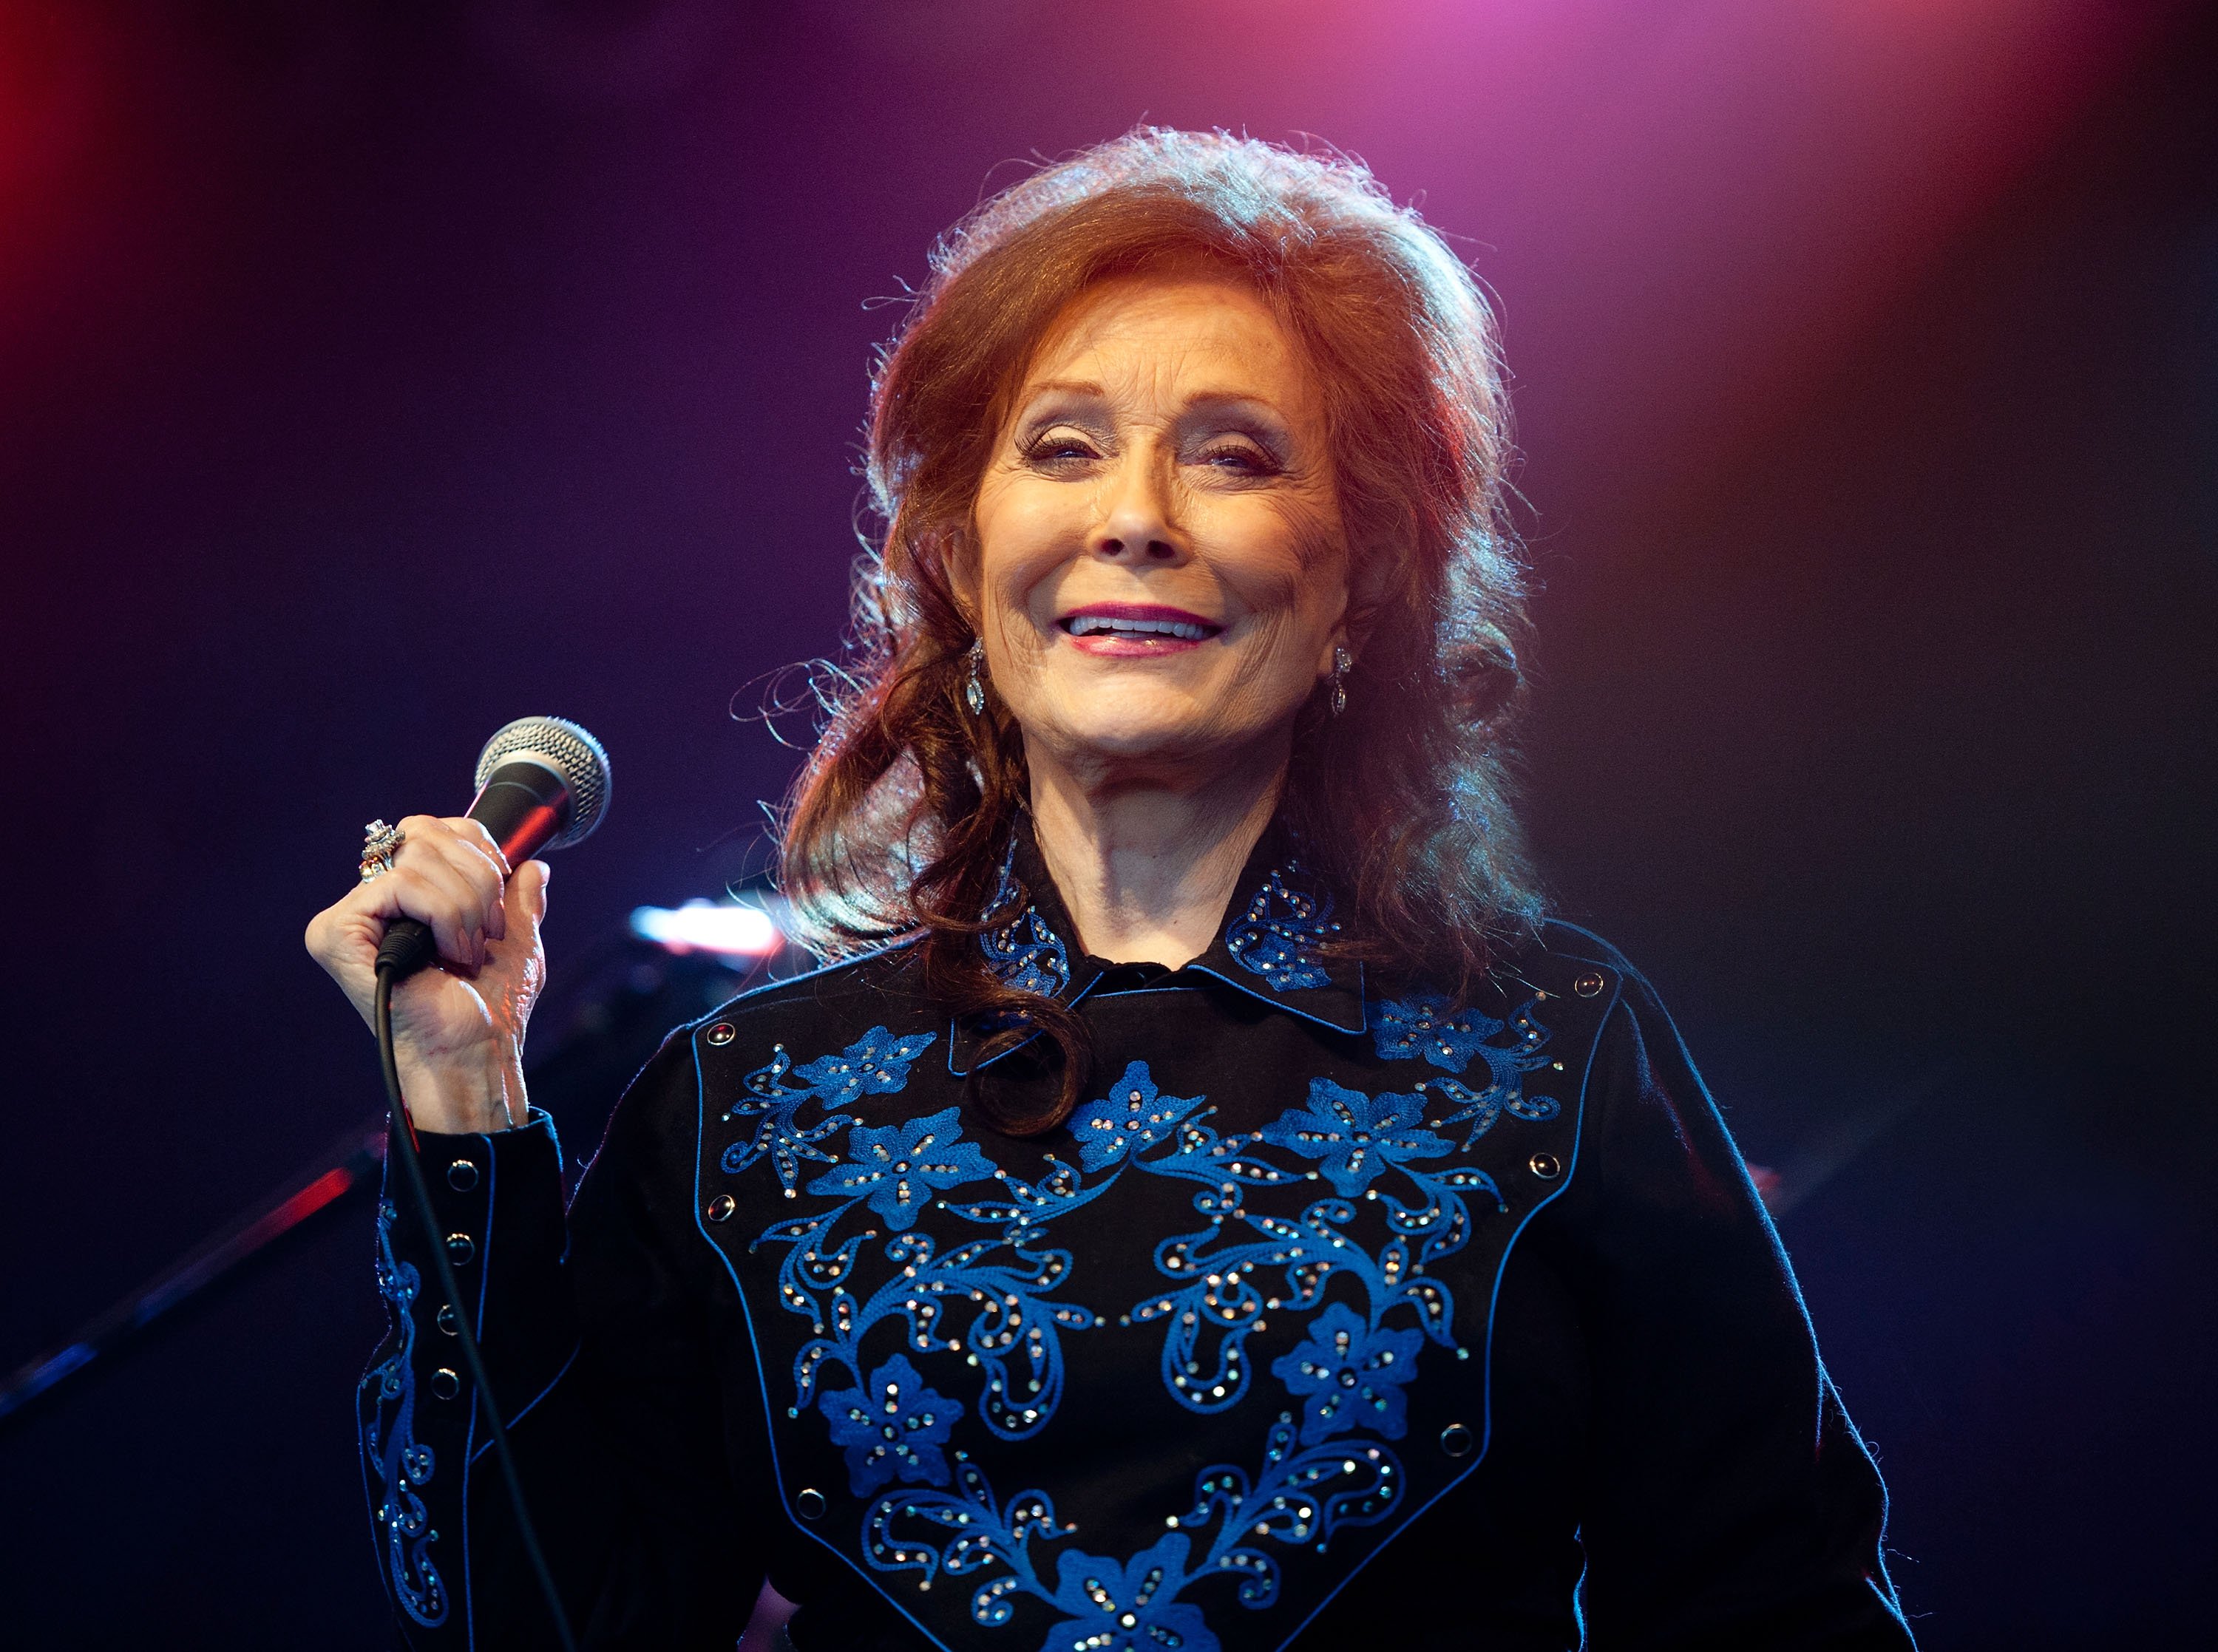 Loretta Lynn stands onstage holding a microphone